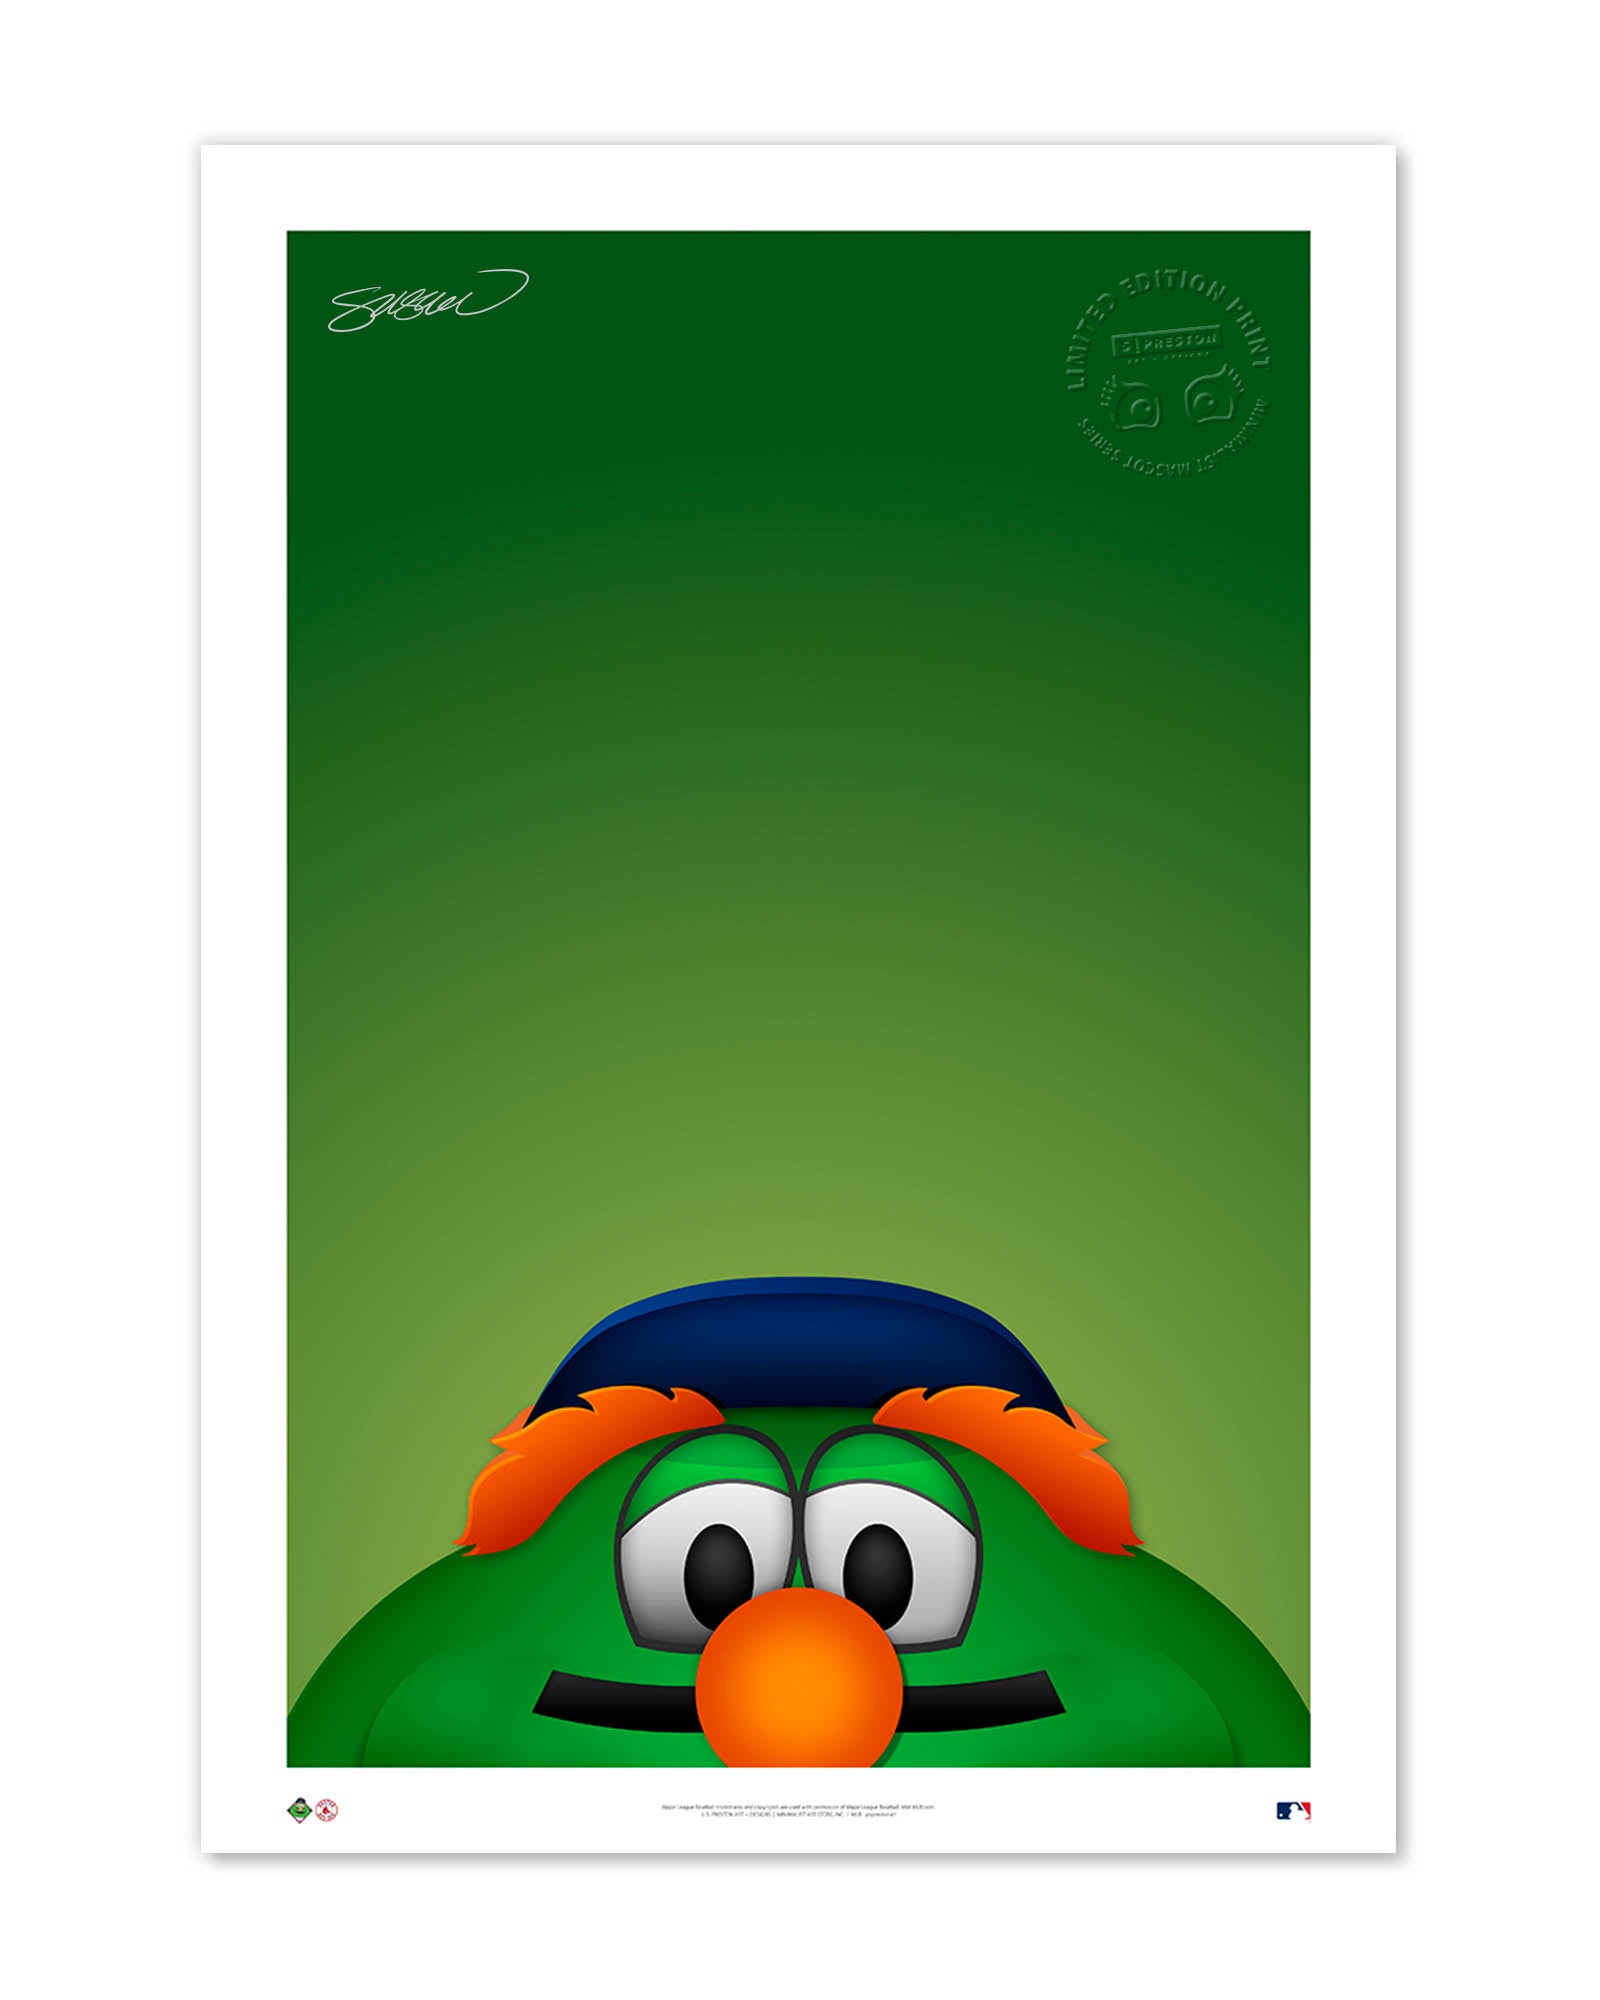 Minimalist Wally the Green Monster